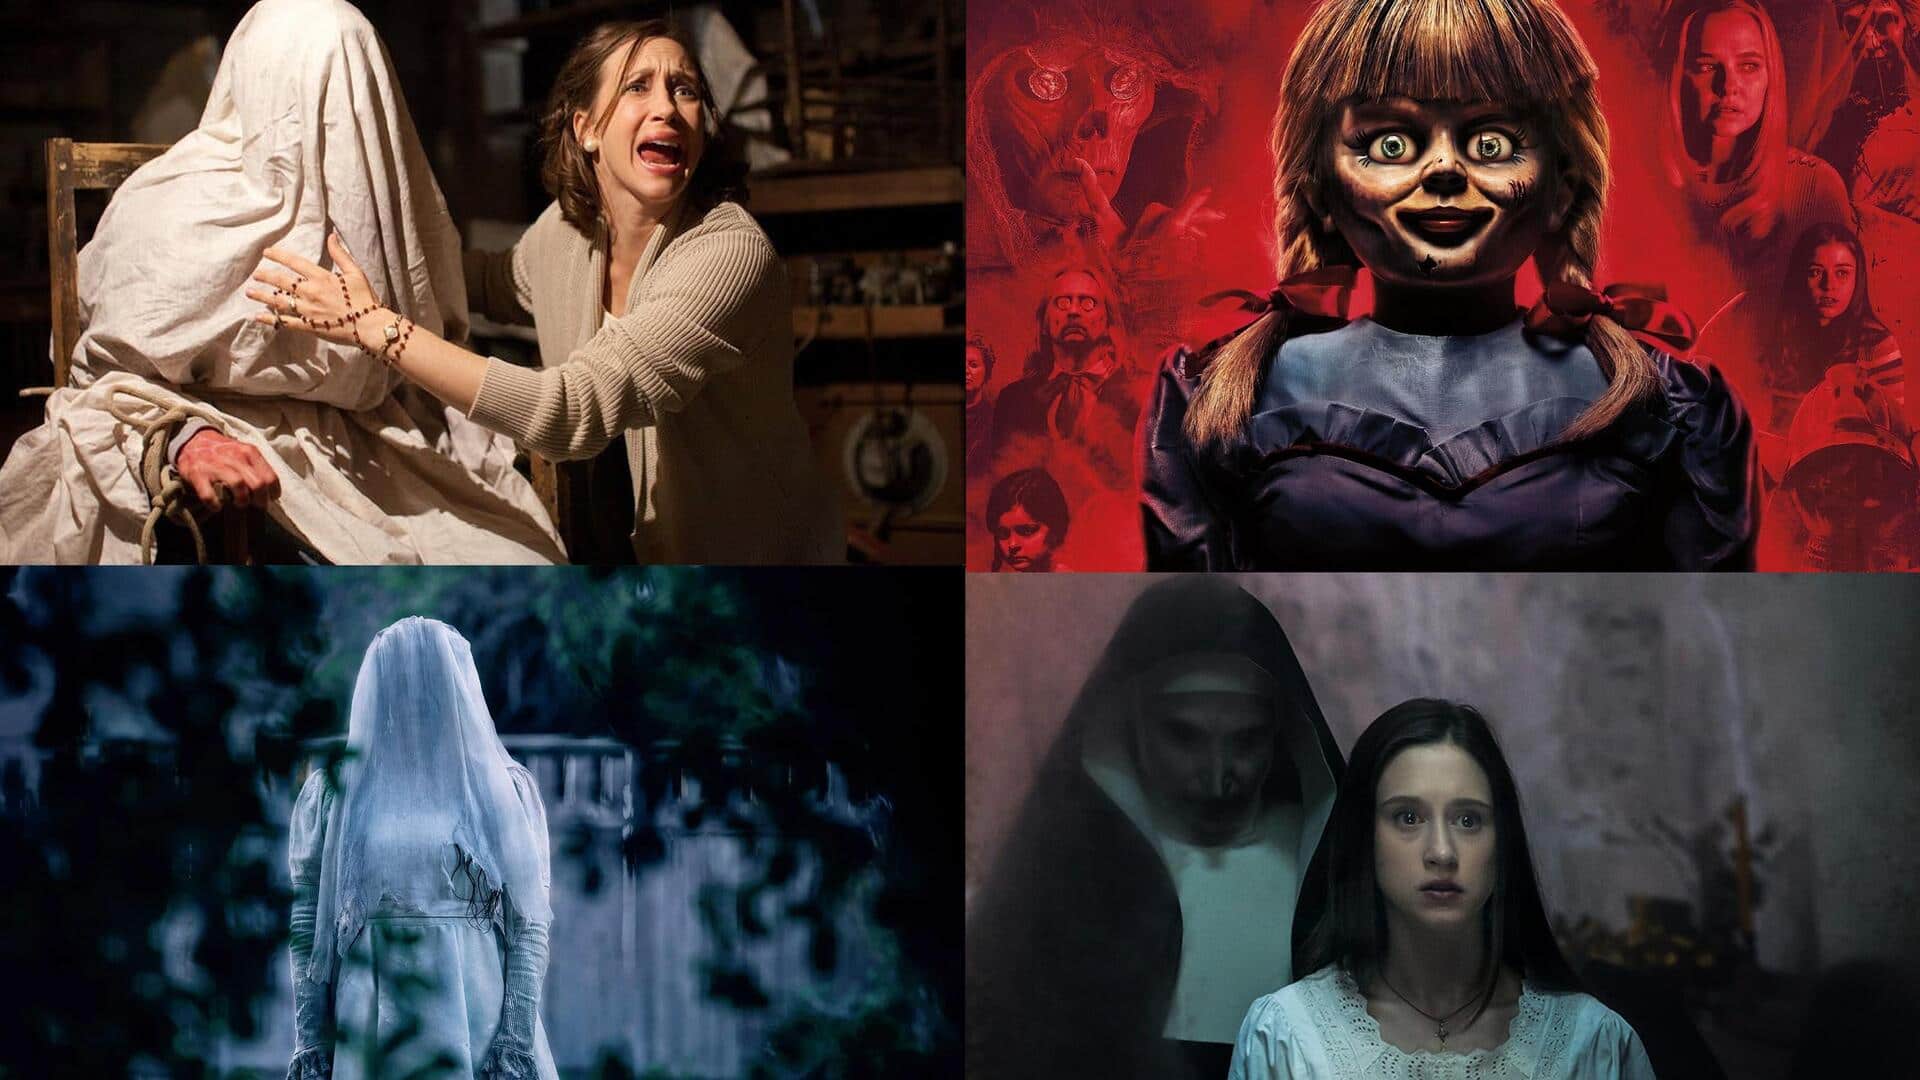 How to watch 'The Conjuring' film series in chronological order